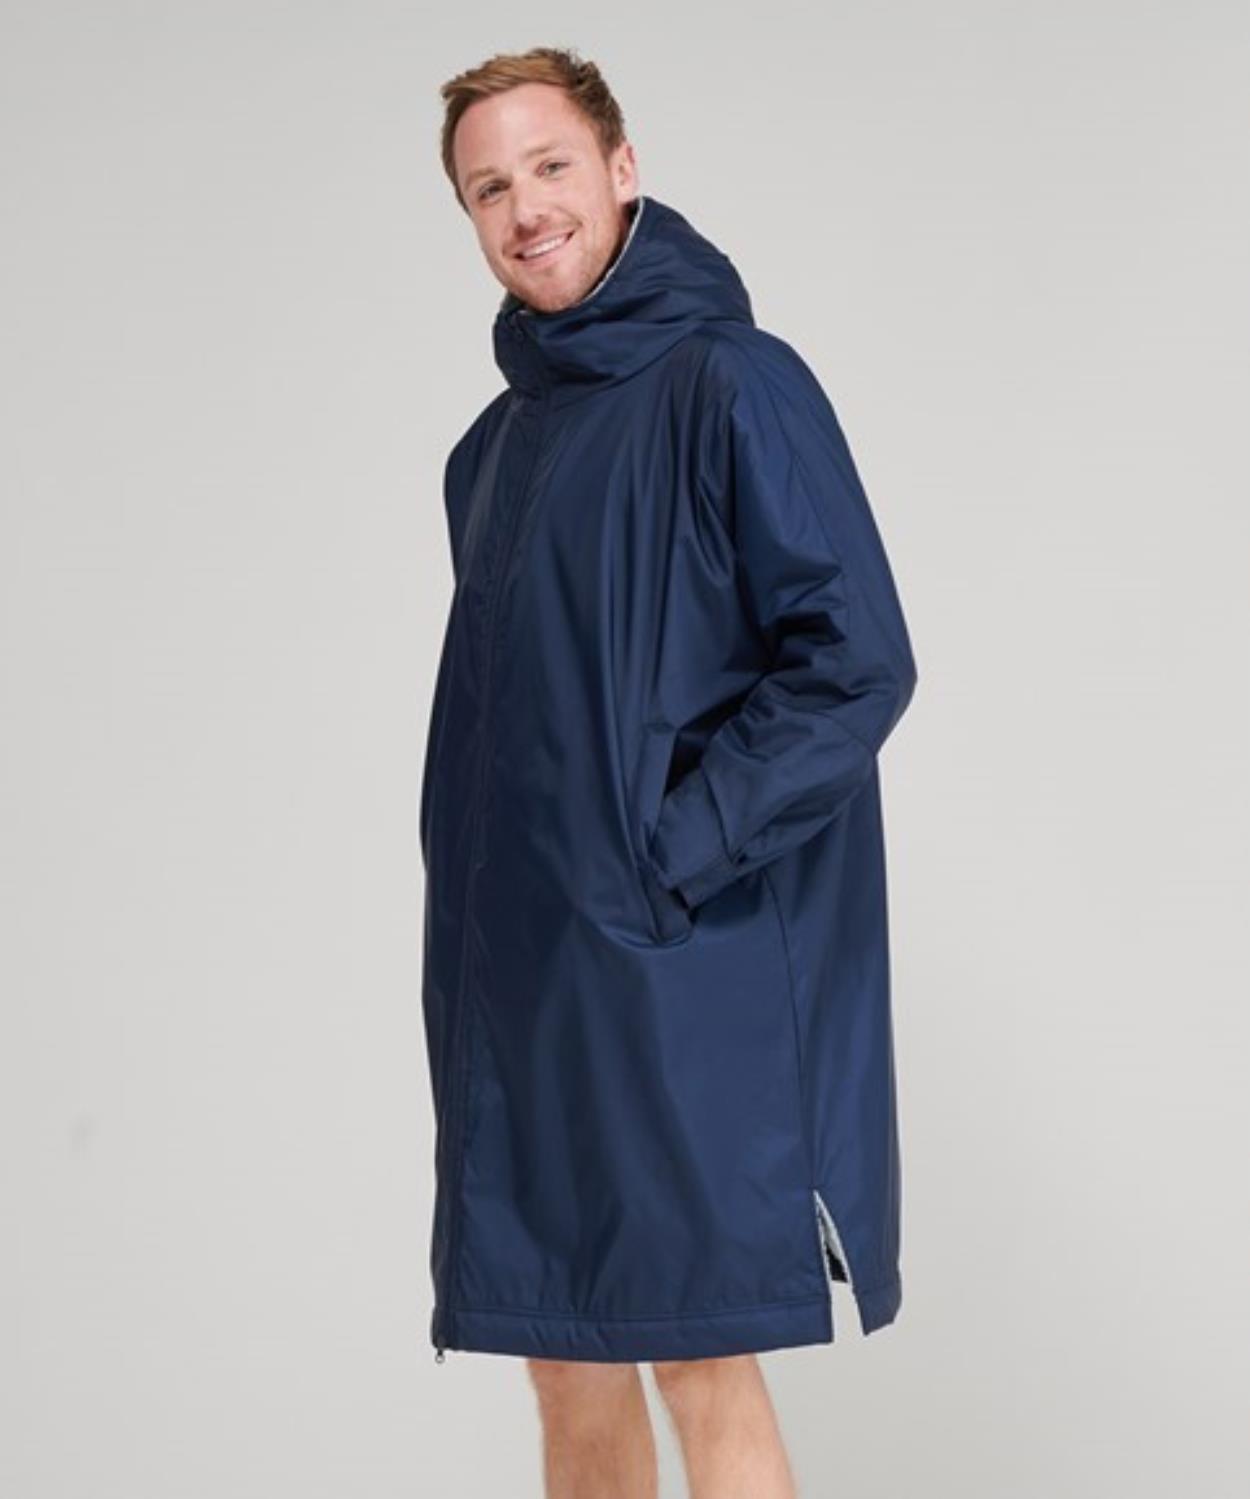 LV690 - All Weather Robe